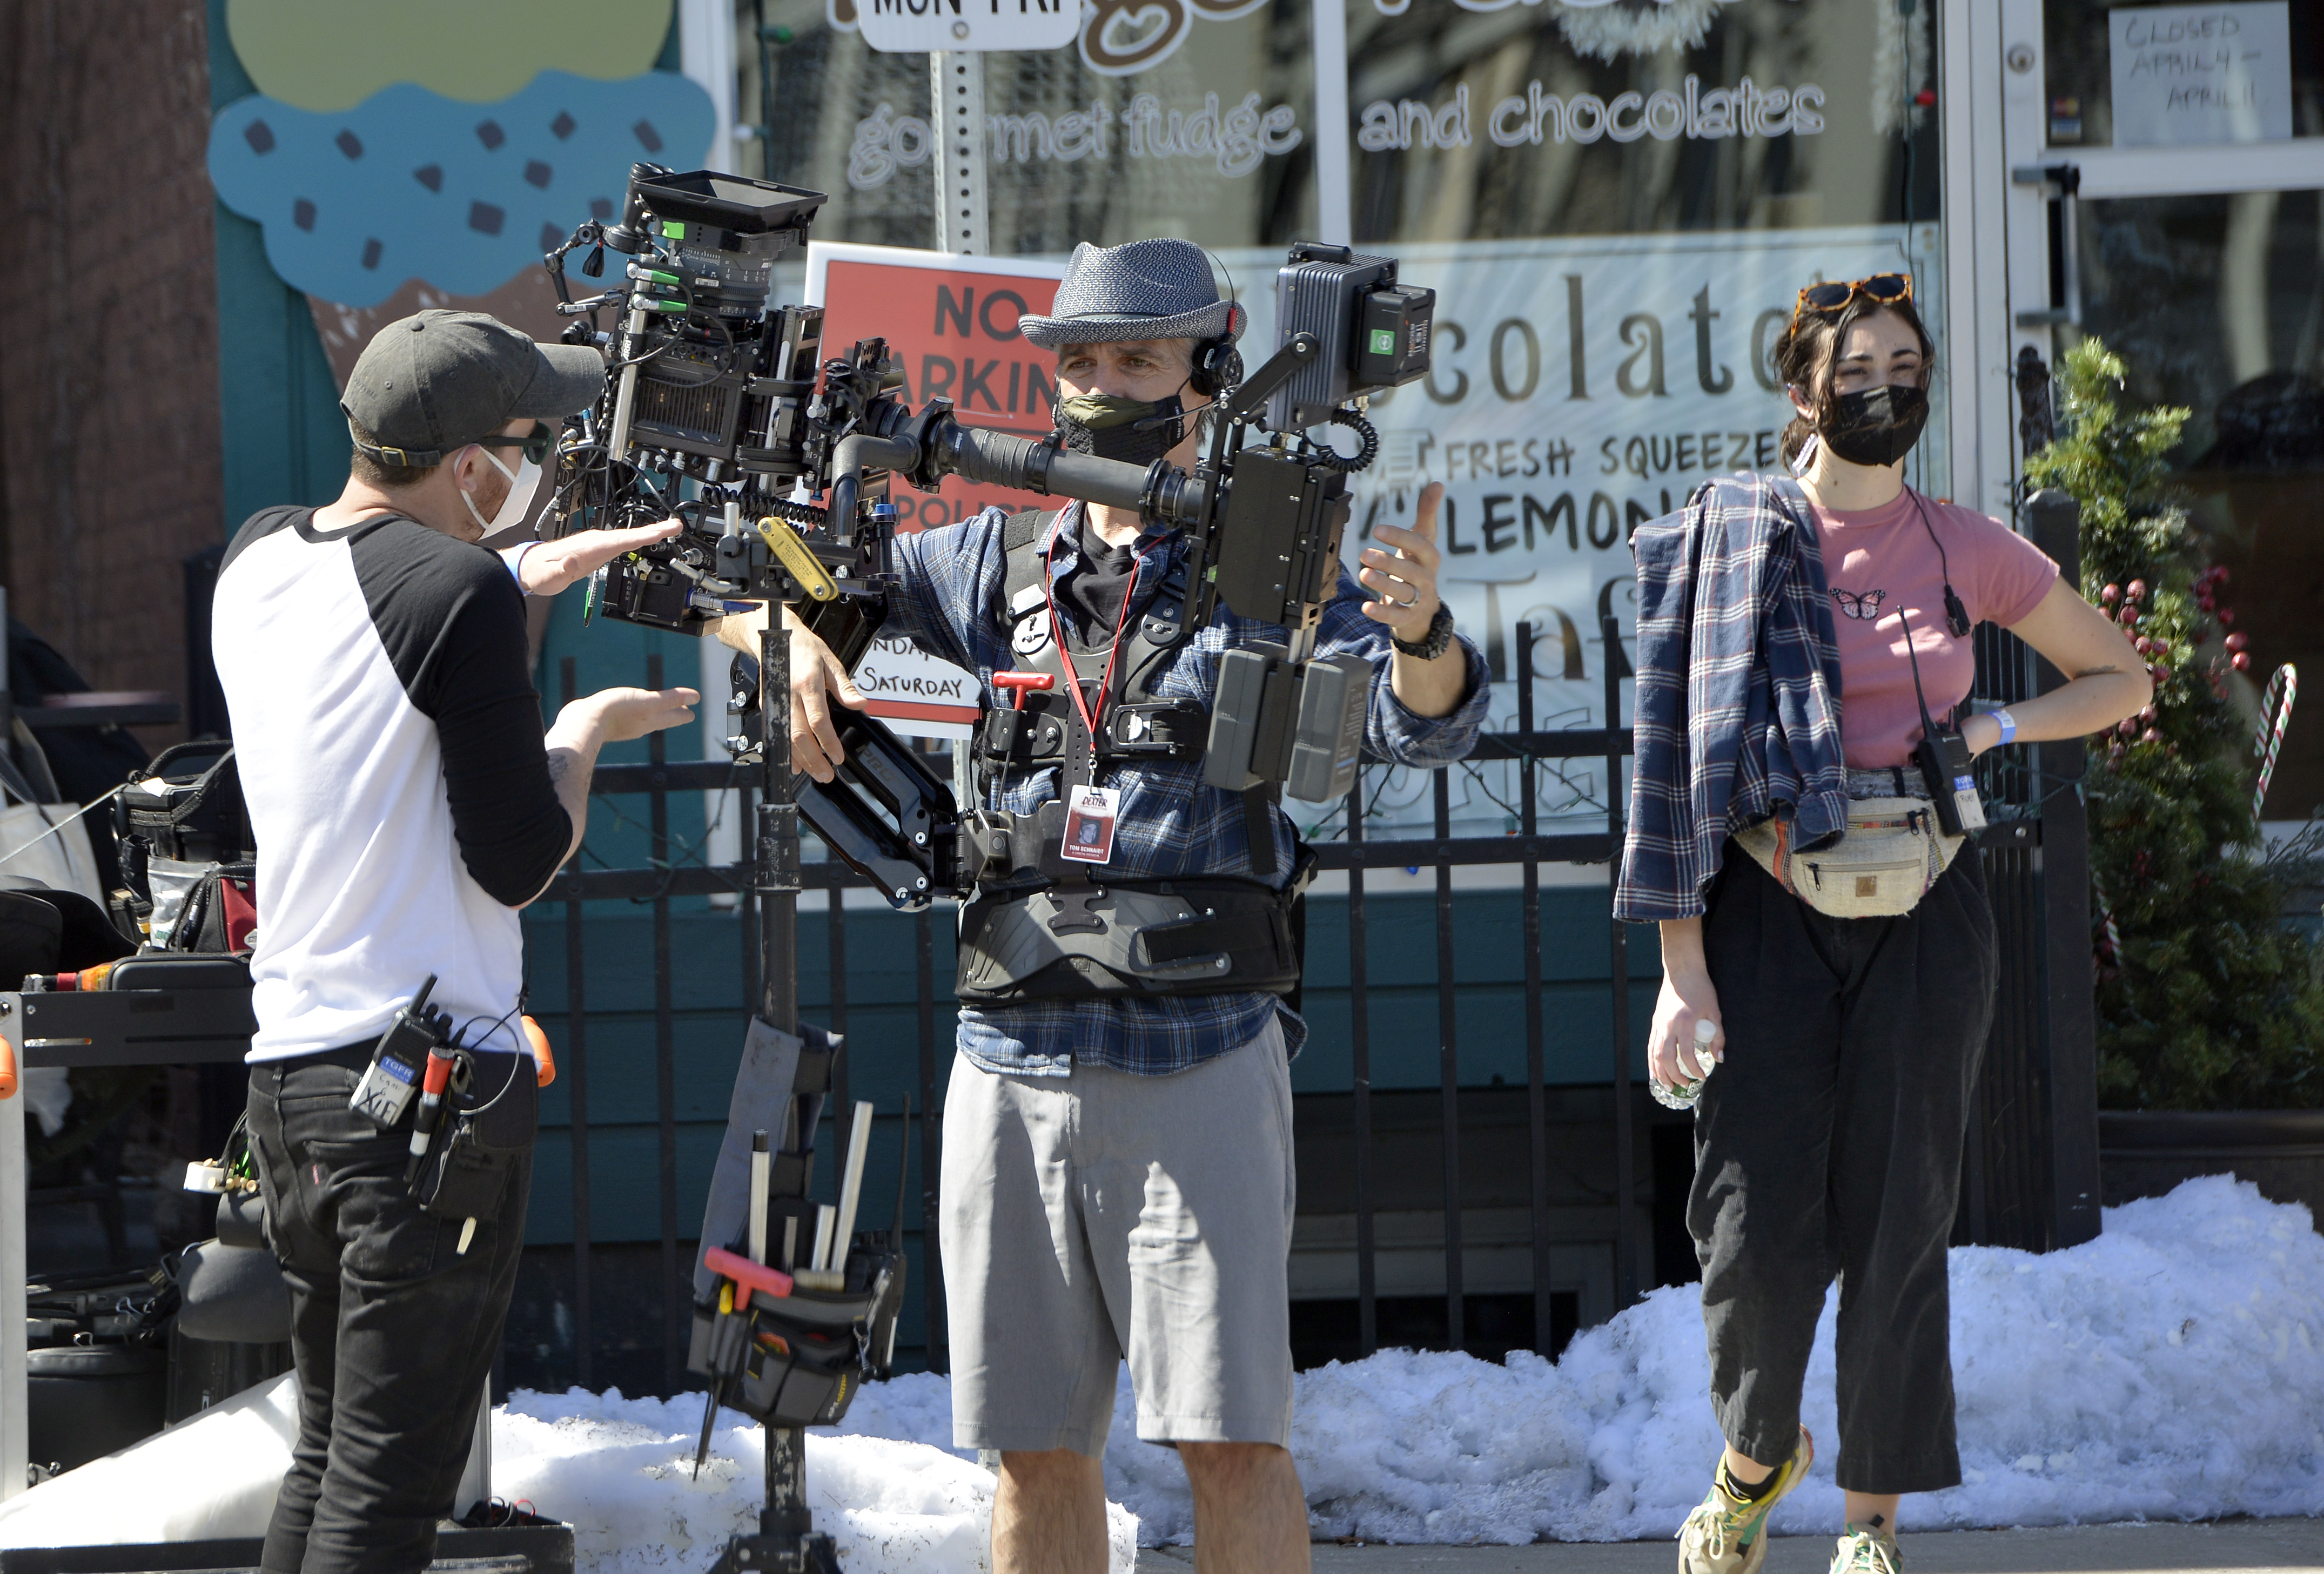 Camera operators chat before filming a scene from the reboot of the show Dexter, filming now in Shelburne Falls.  (Don Treeger / The Republican)